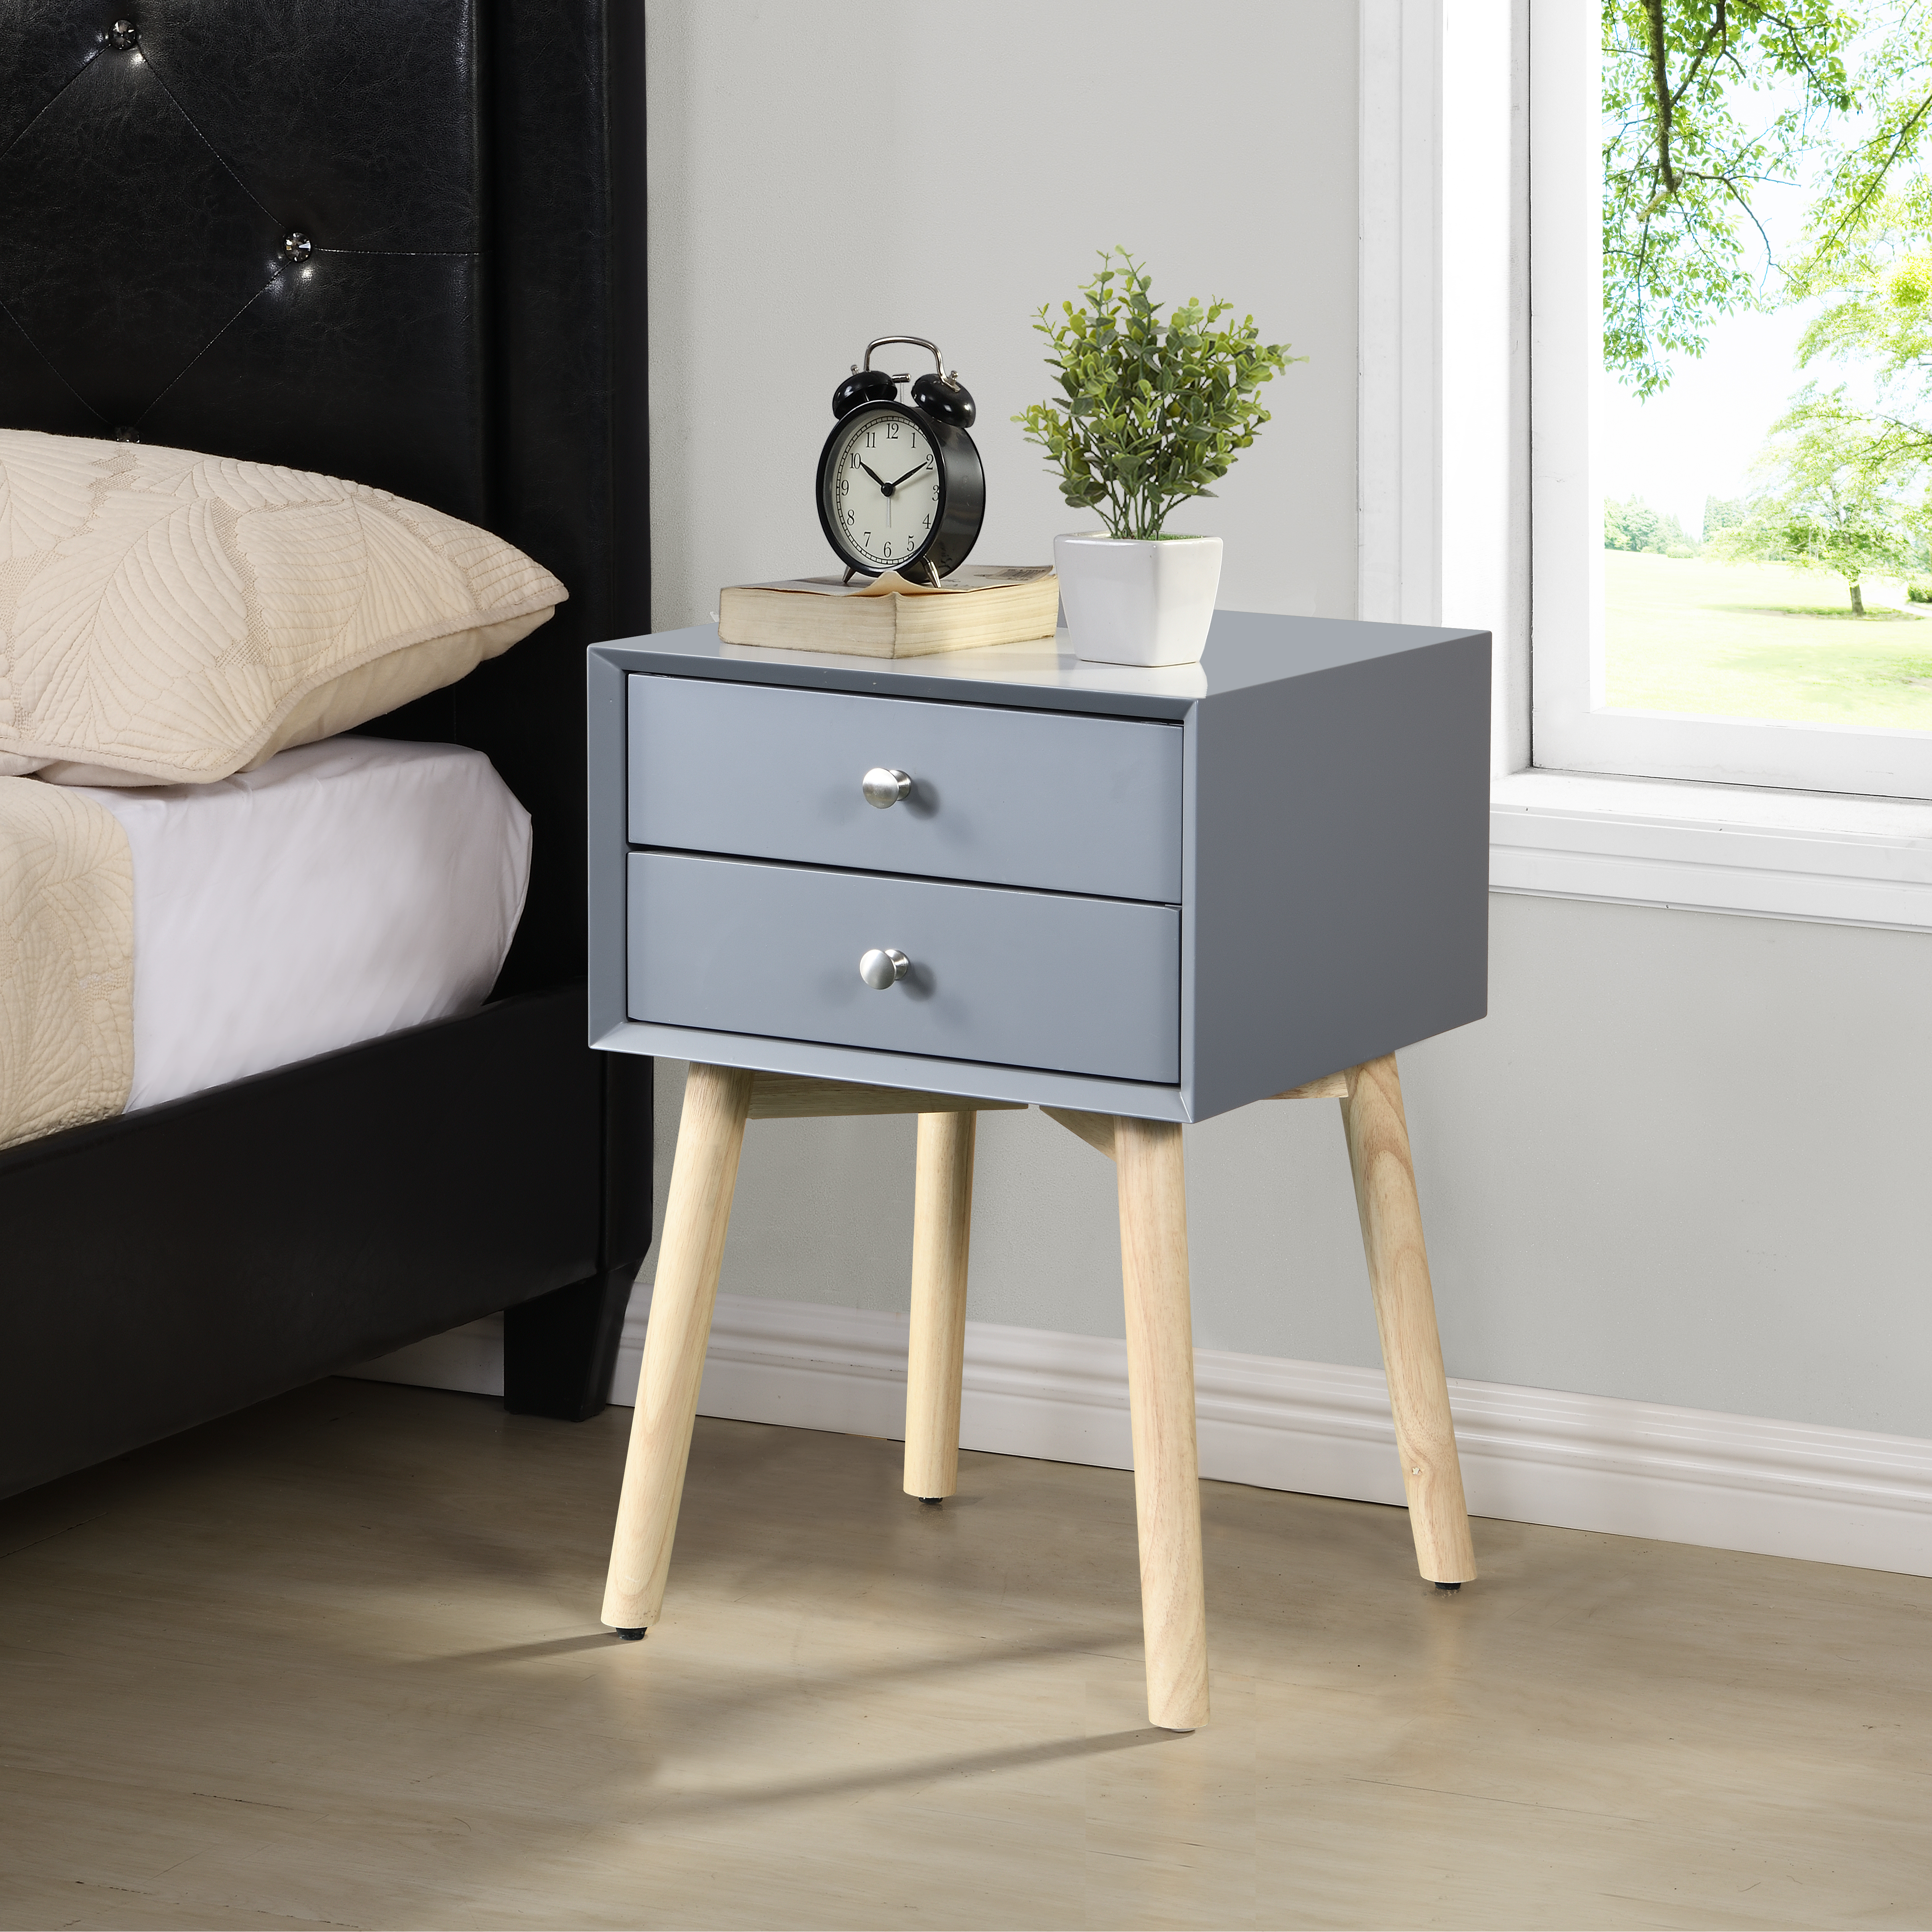 Side Table with 2 Drawer and Rubber Wood Legs, Mid-Century Modern Storage Cabinet for Bedroom Living Room Furniture, Gray-CASAINC